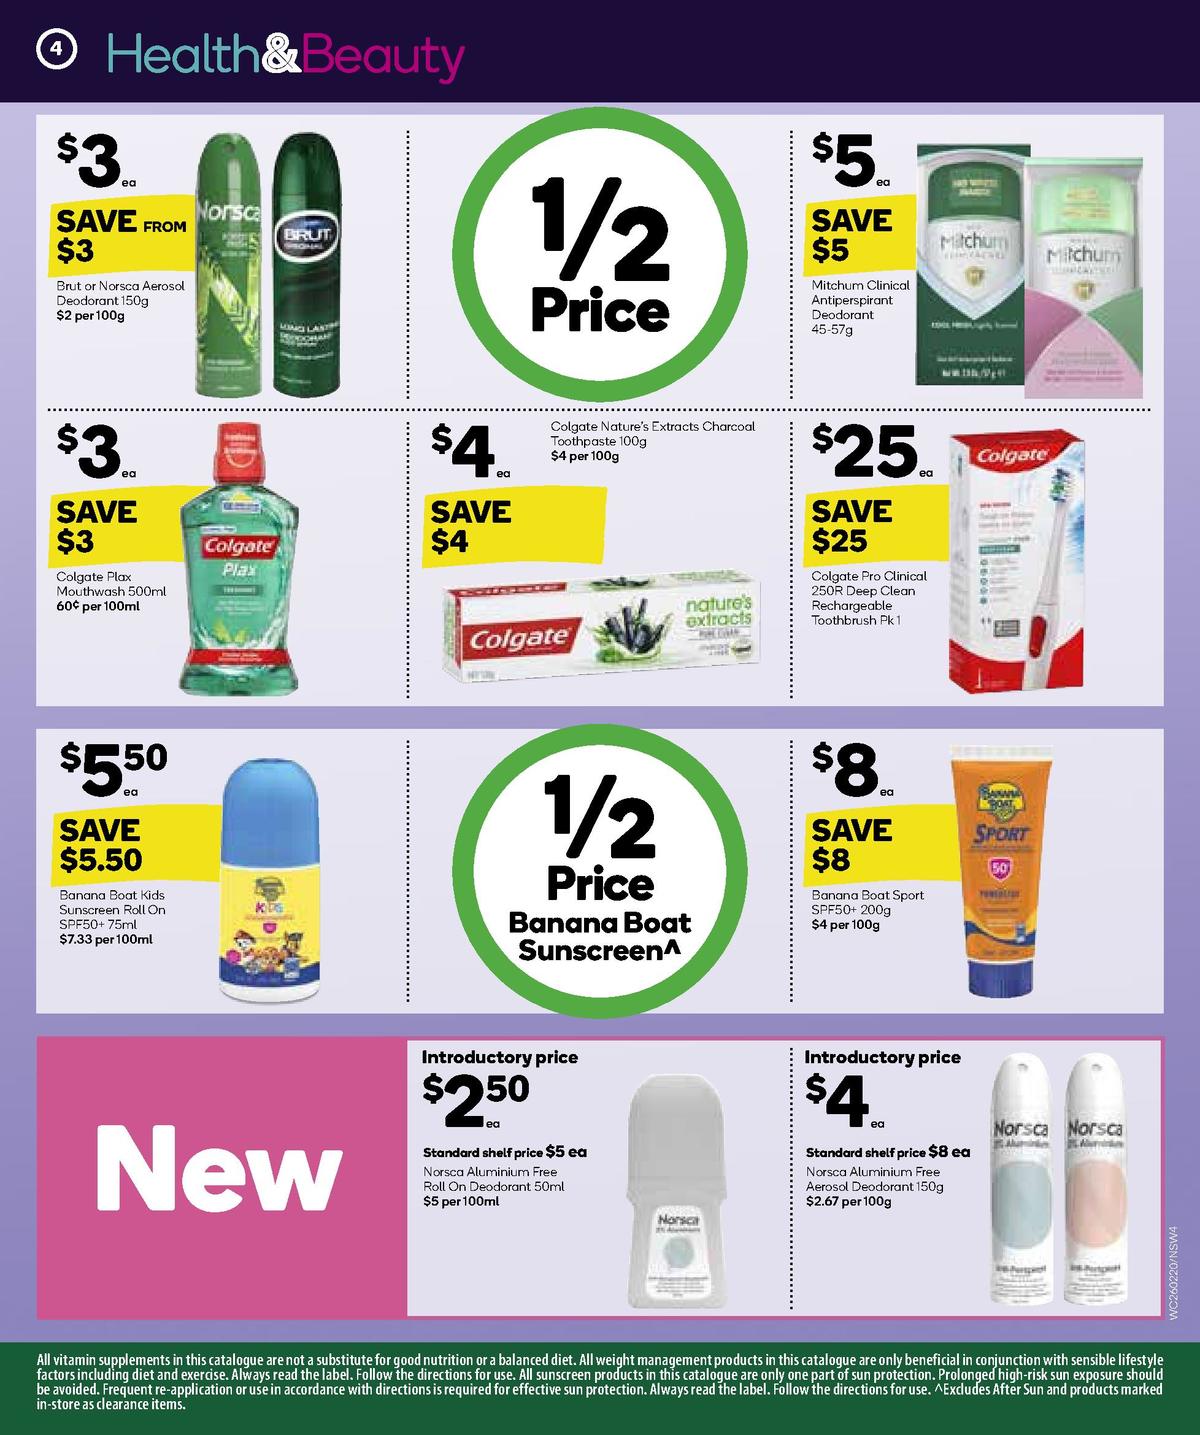 Woolworths Health & Beauty Catalogues from 26 February